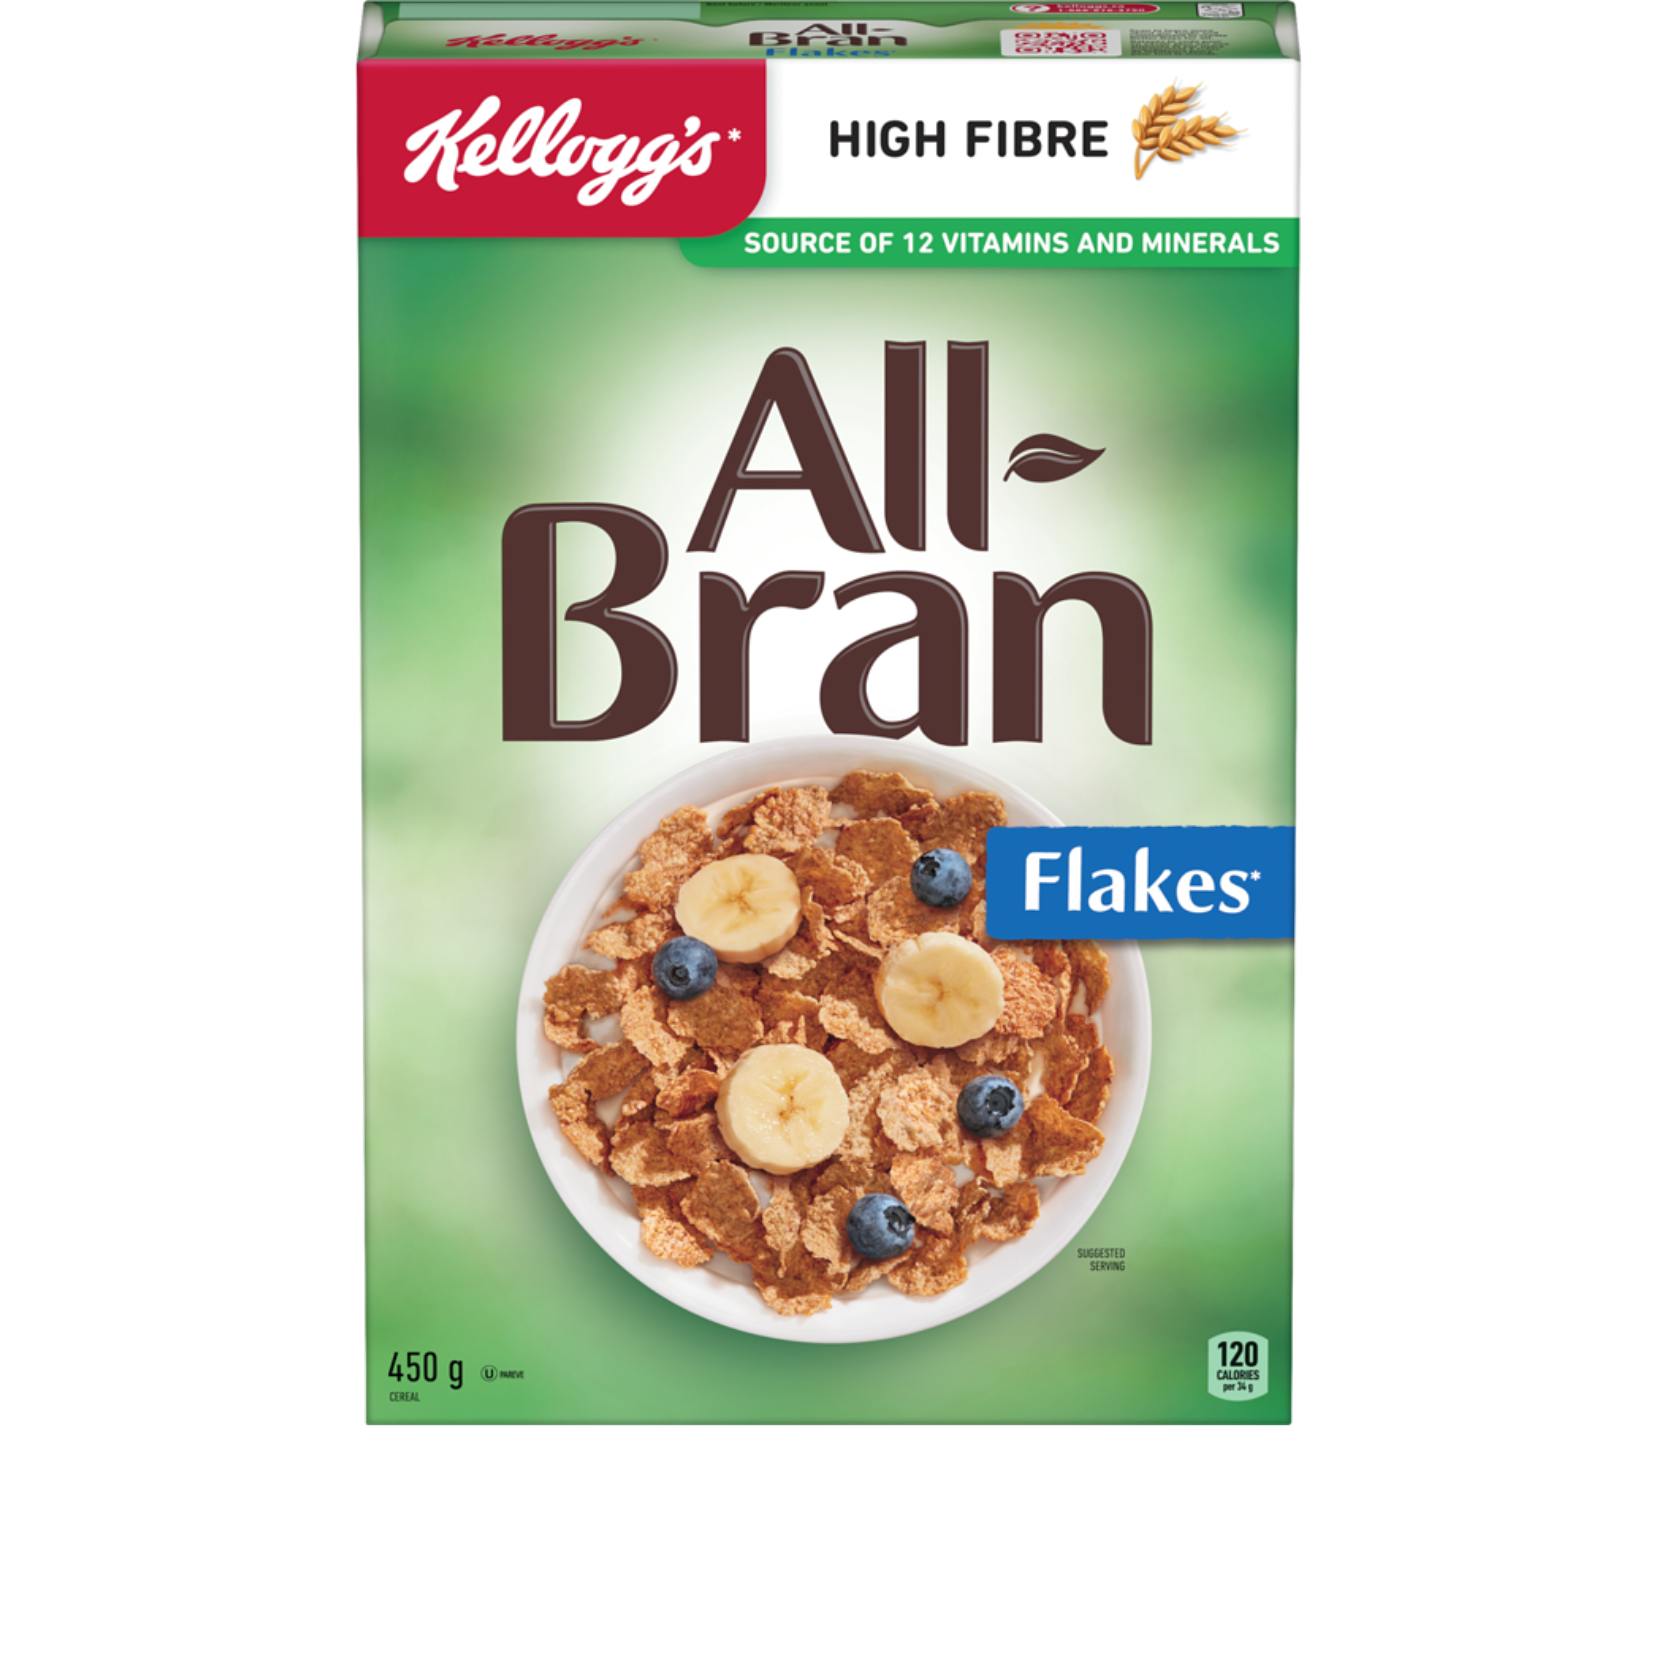 Kellogg's All Bran Flakes Cereal 450g